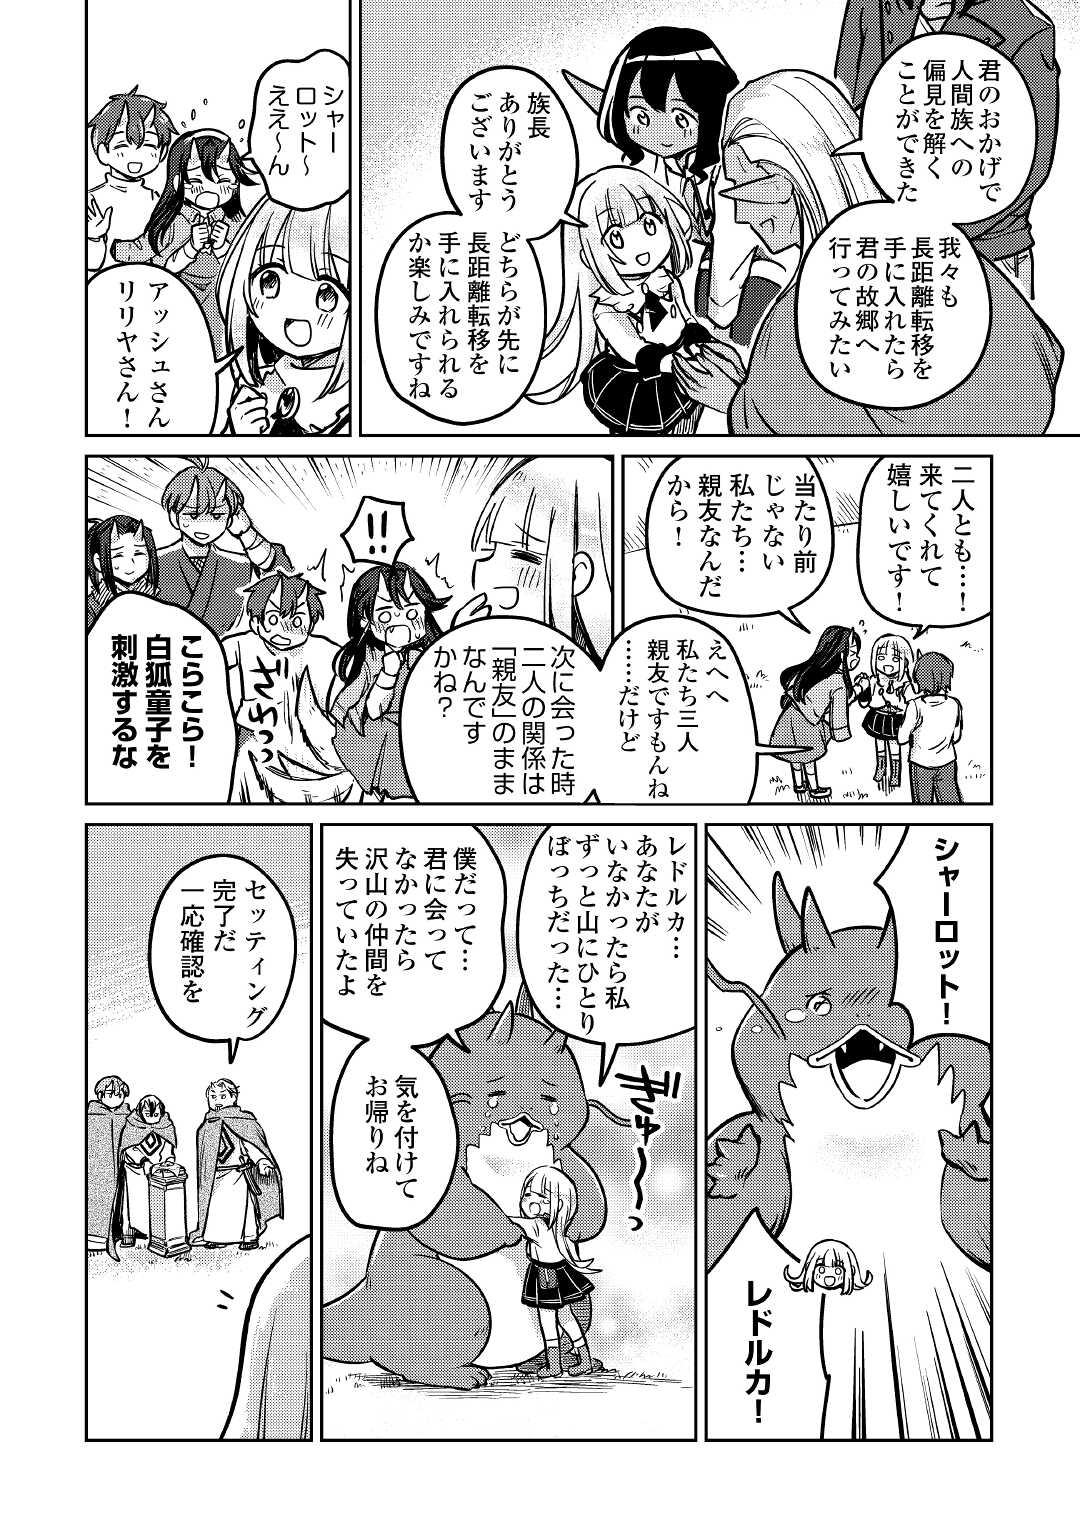 The Former Structural Researcher’s Story of Otherworldly Adventure 第41話 - Page 16